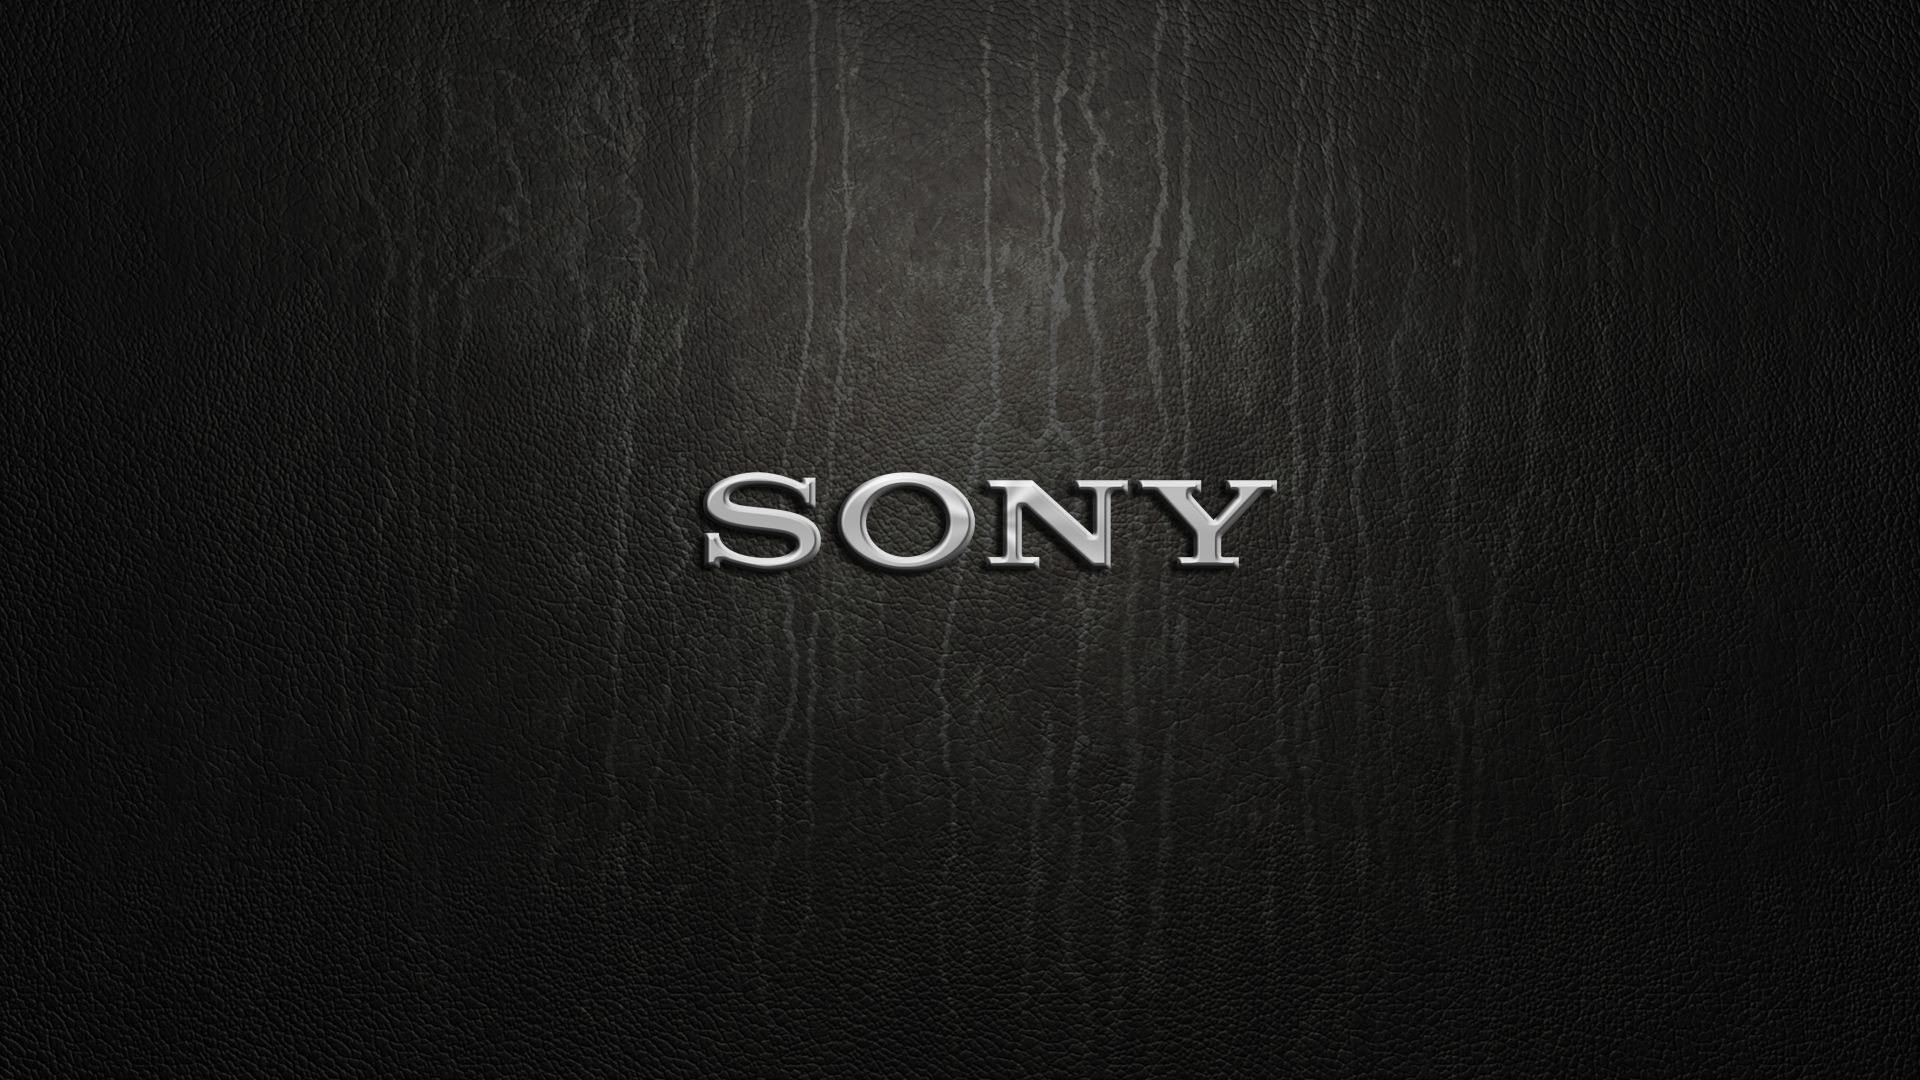 sony, products lock screen backgrounds